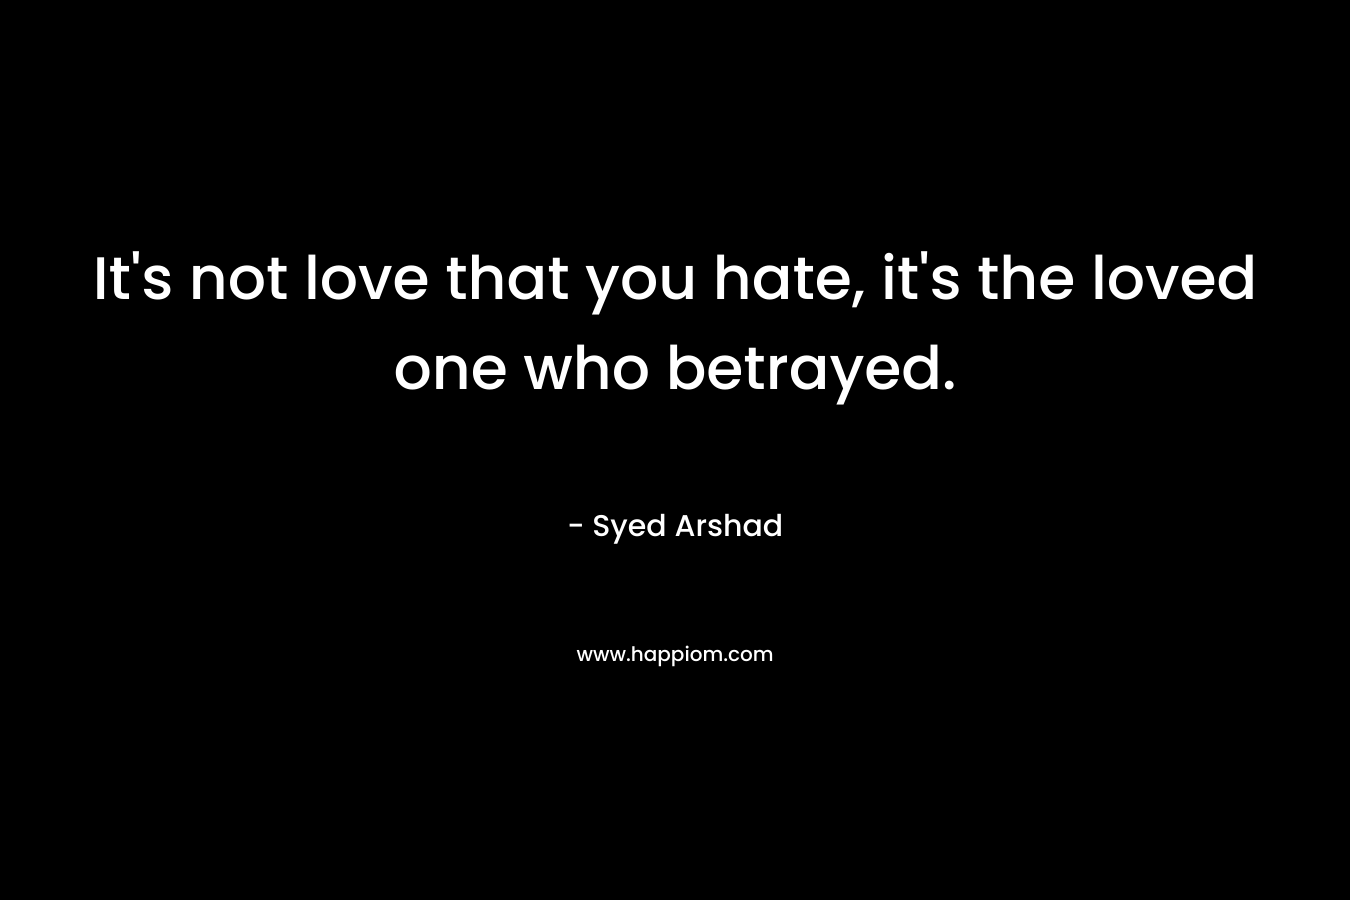 It’s not love that you hate, it’s the loved one who betrayed. – Syed Arshad